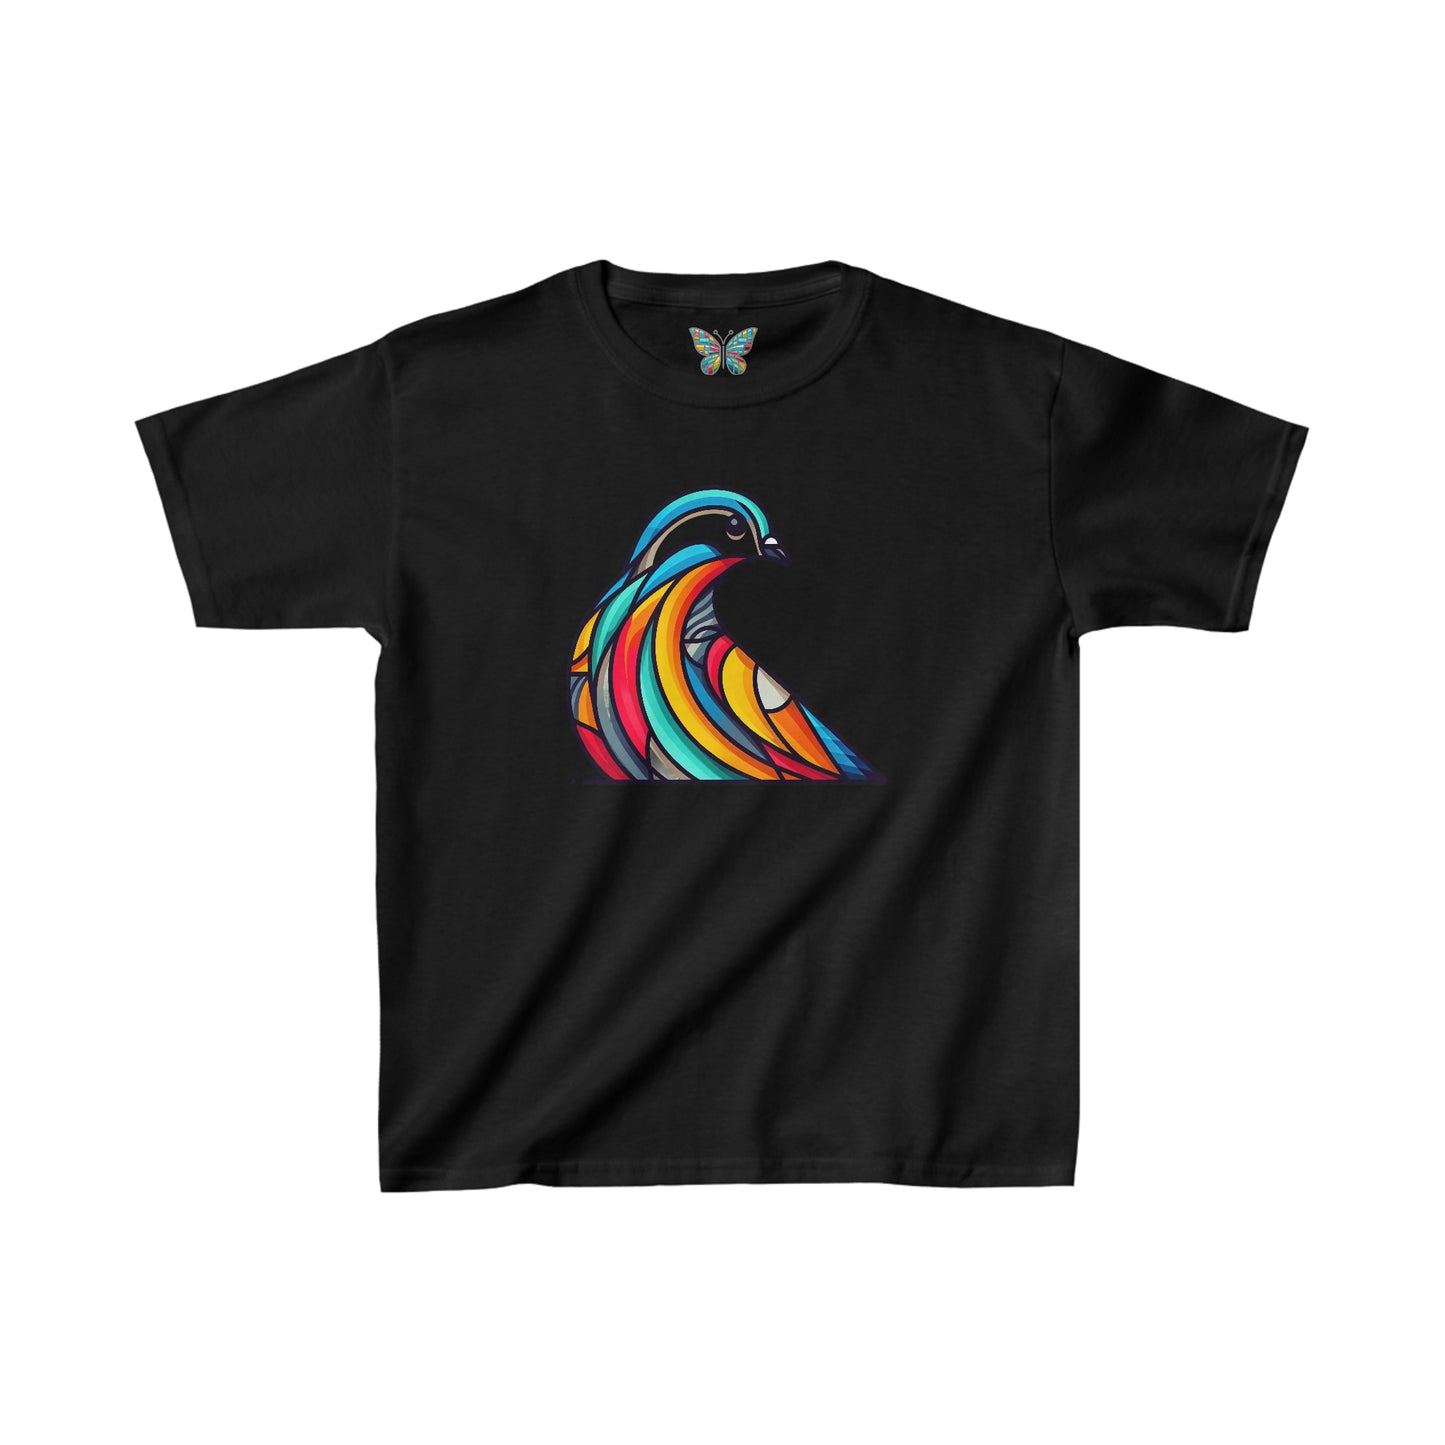 Passenger Pigeon Fluxidazzle - Youth - Snazzle Tee